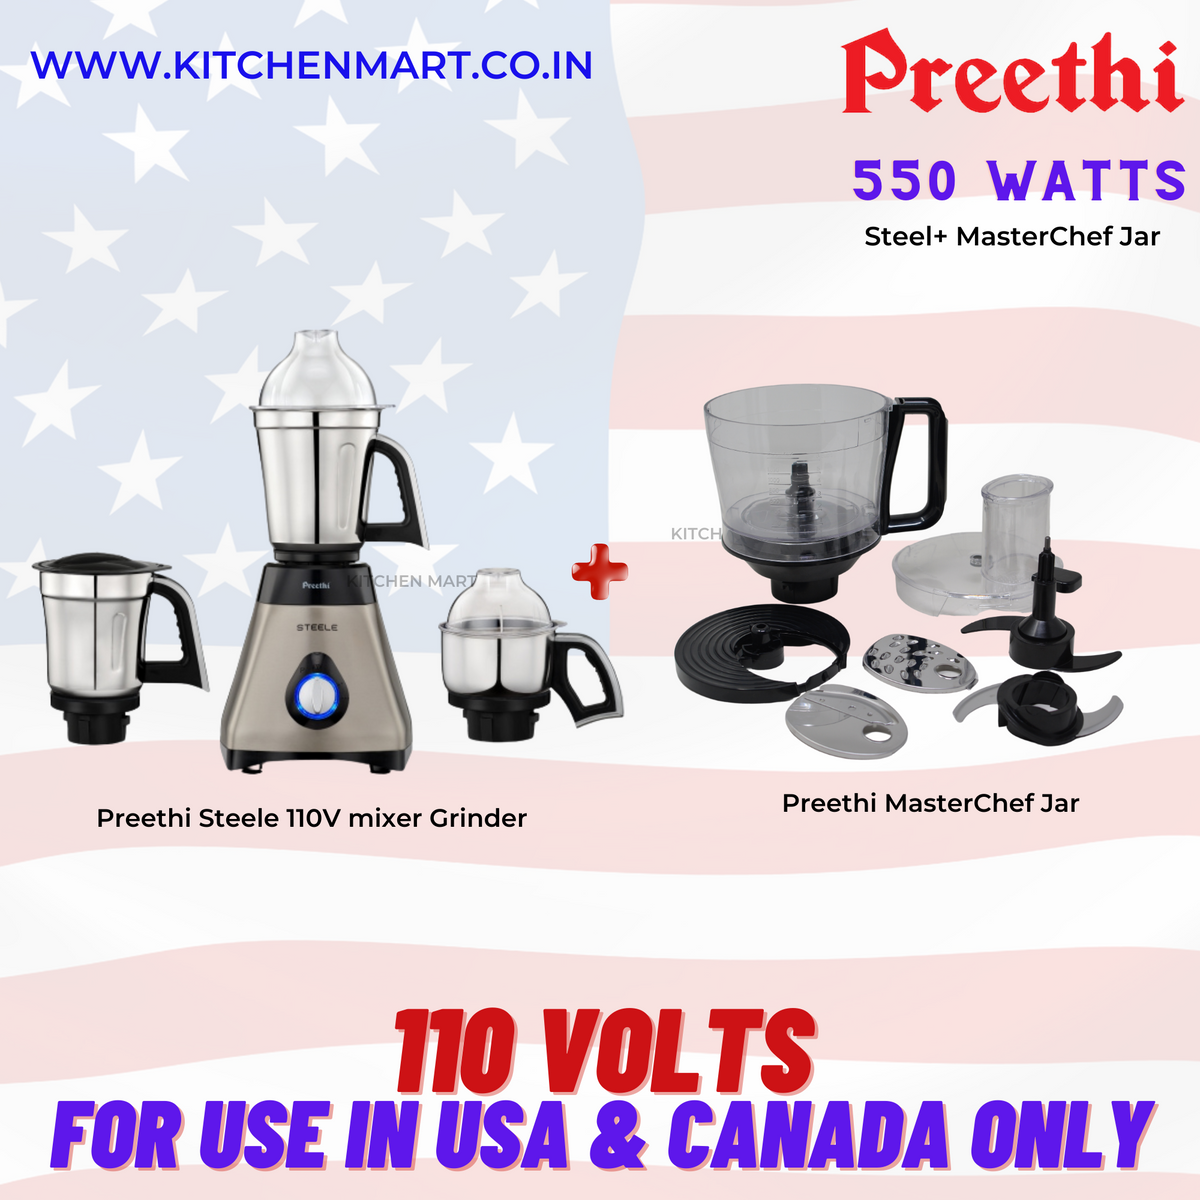 Preethi Steele MG 206 110V, 550-Watt Mixer Grinder with Masterchef Jar - 110 Volts EXCLUSIVELY for USA &amp; Canada!